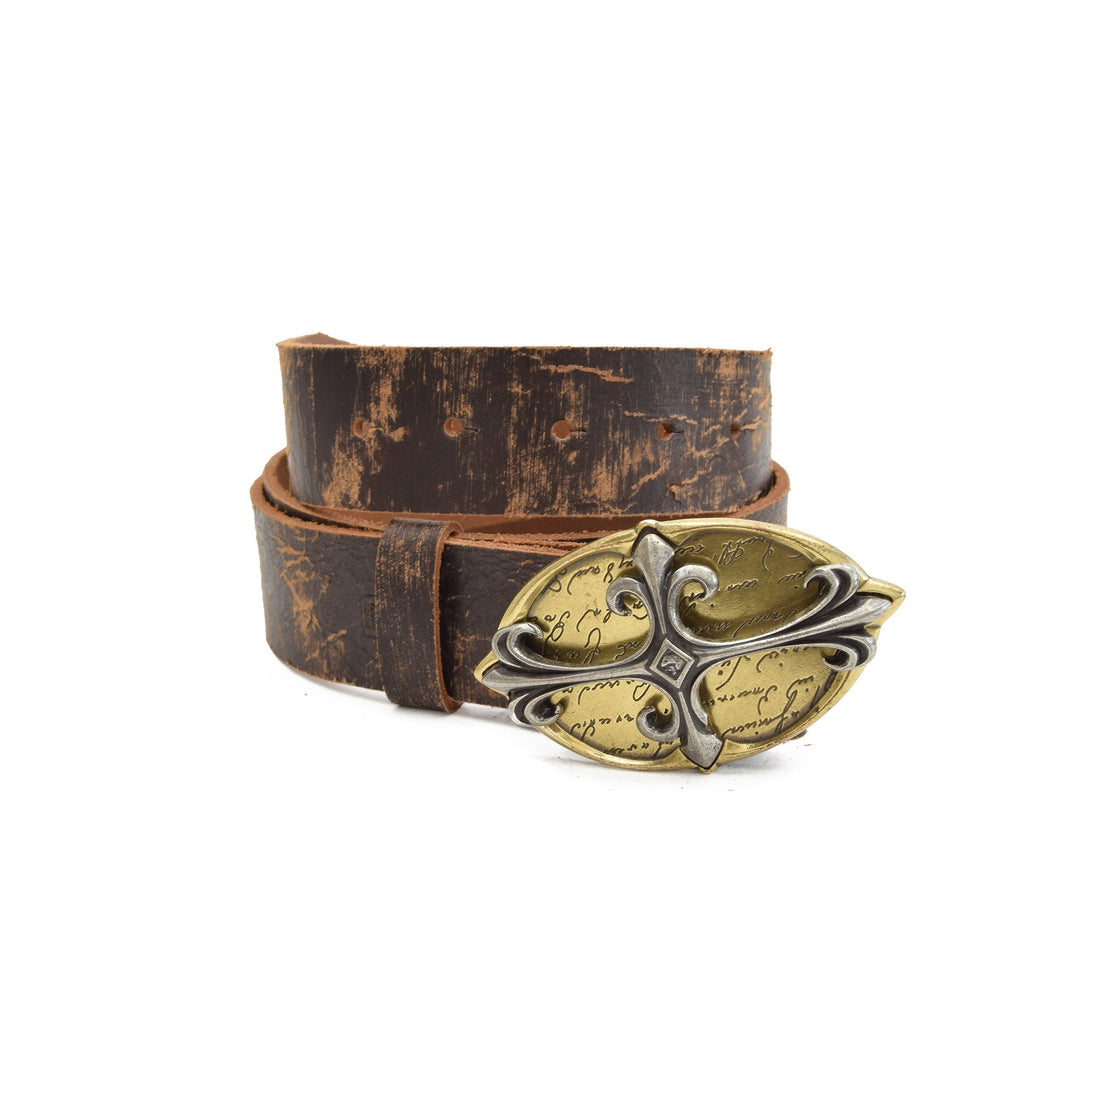 Royal Leather Belt Brown with Changeable Buckle - 80 - Belts Zengoda Shop online from Artisan Brands